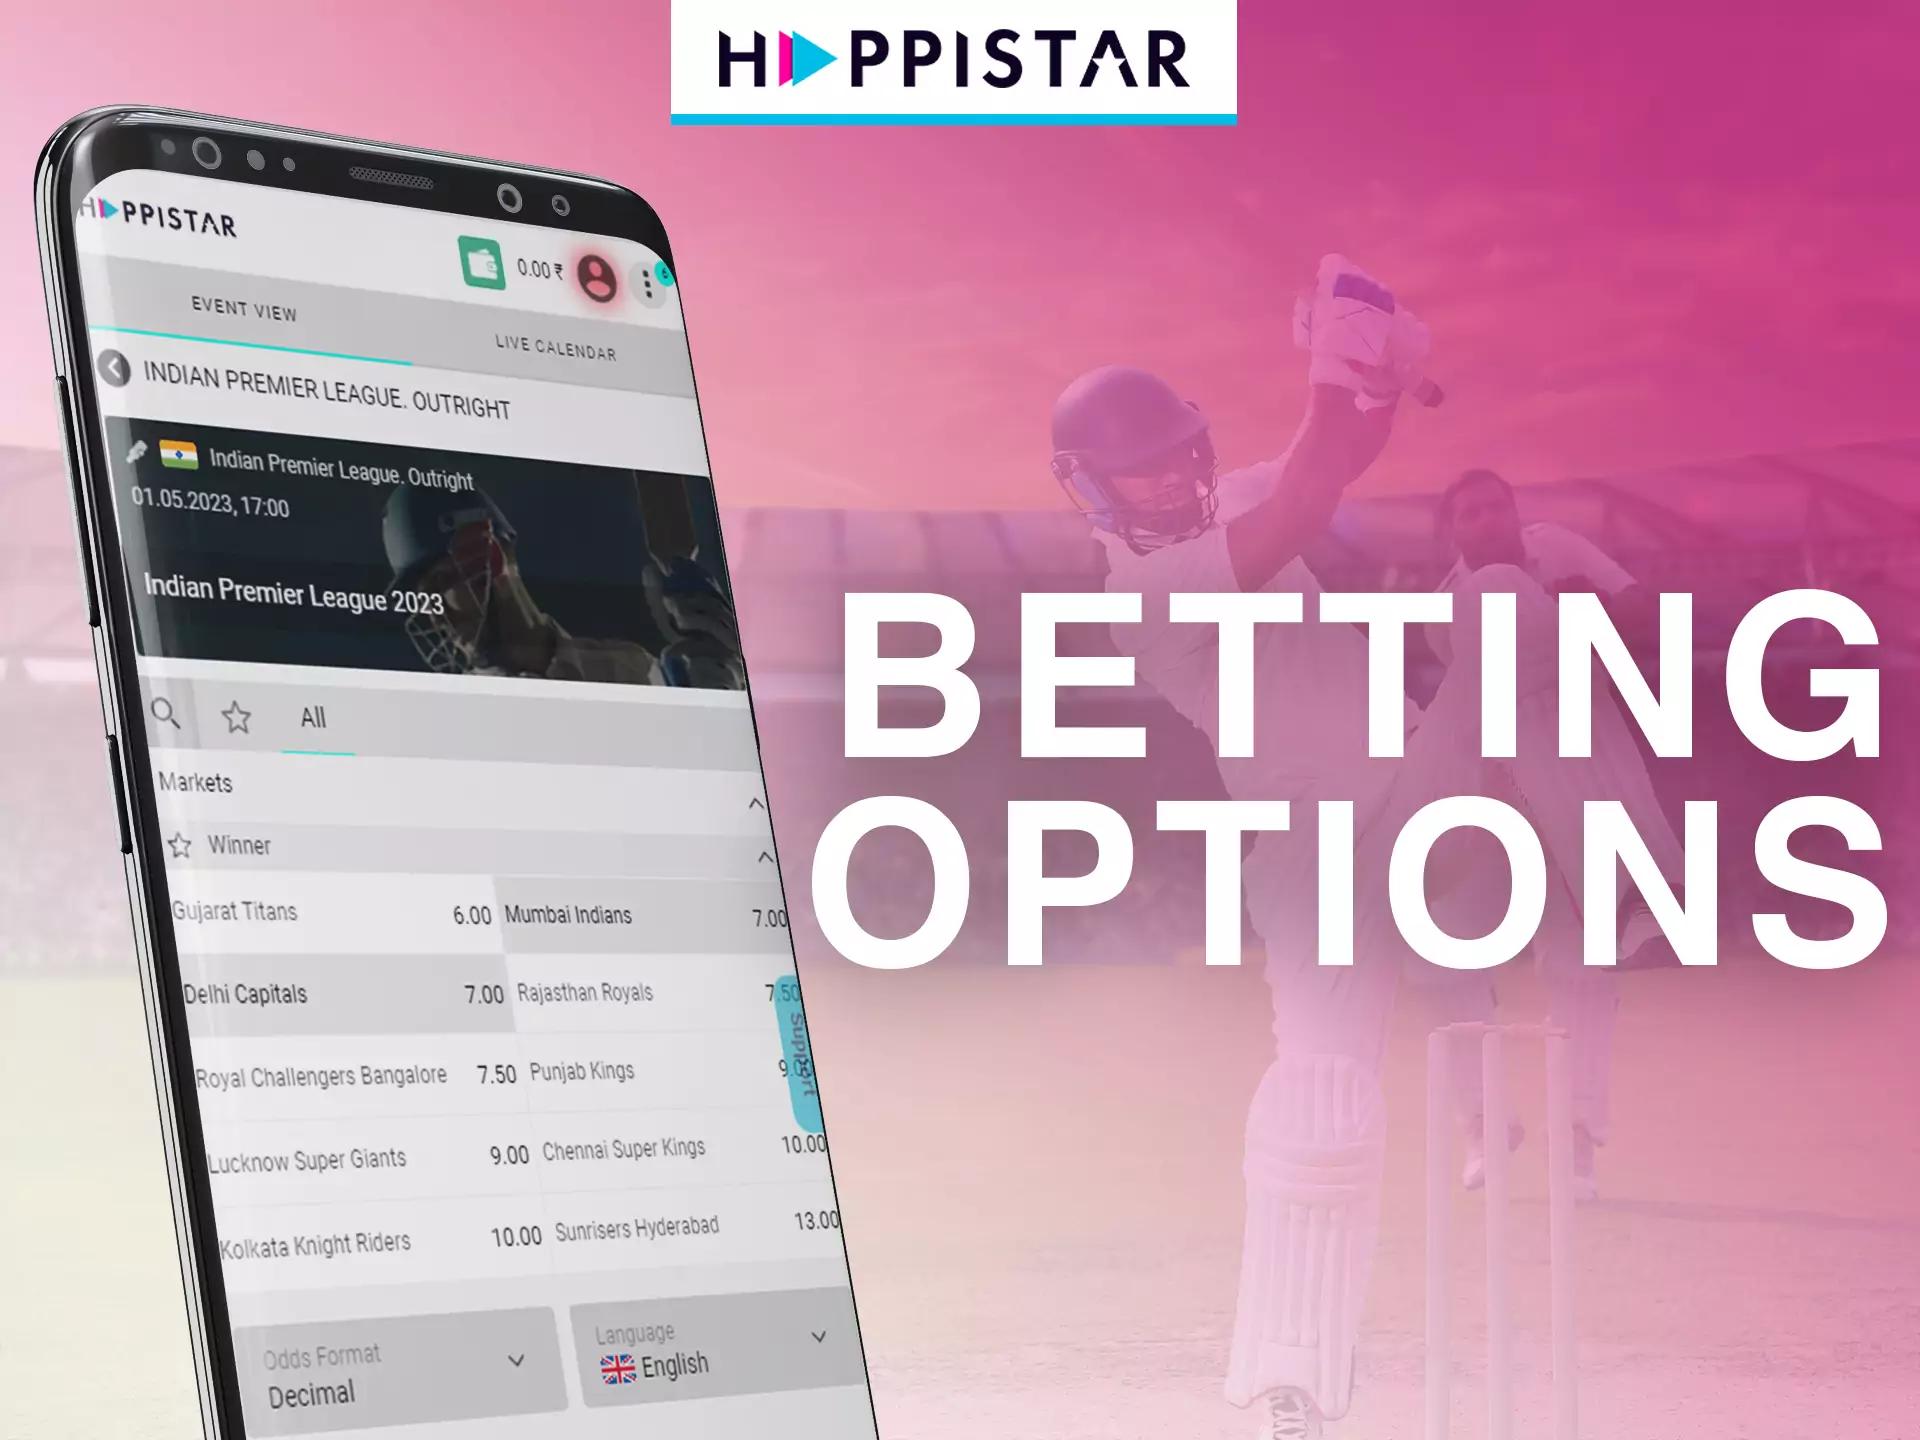 On Happistar, you can place bets on match results.